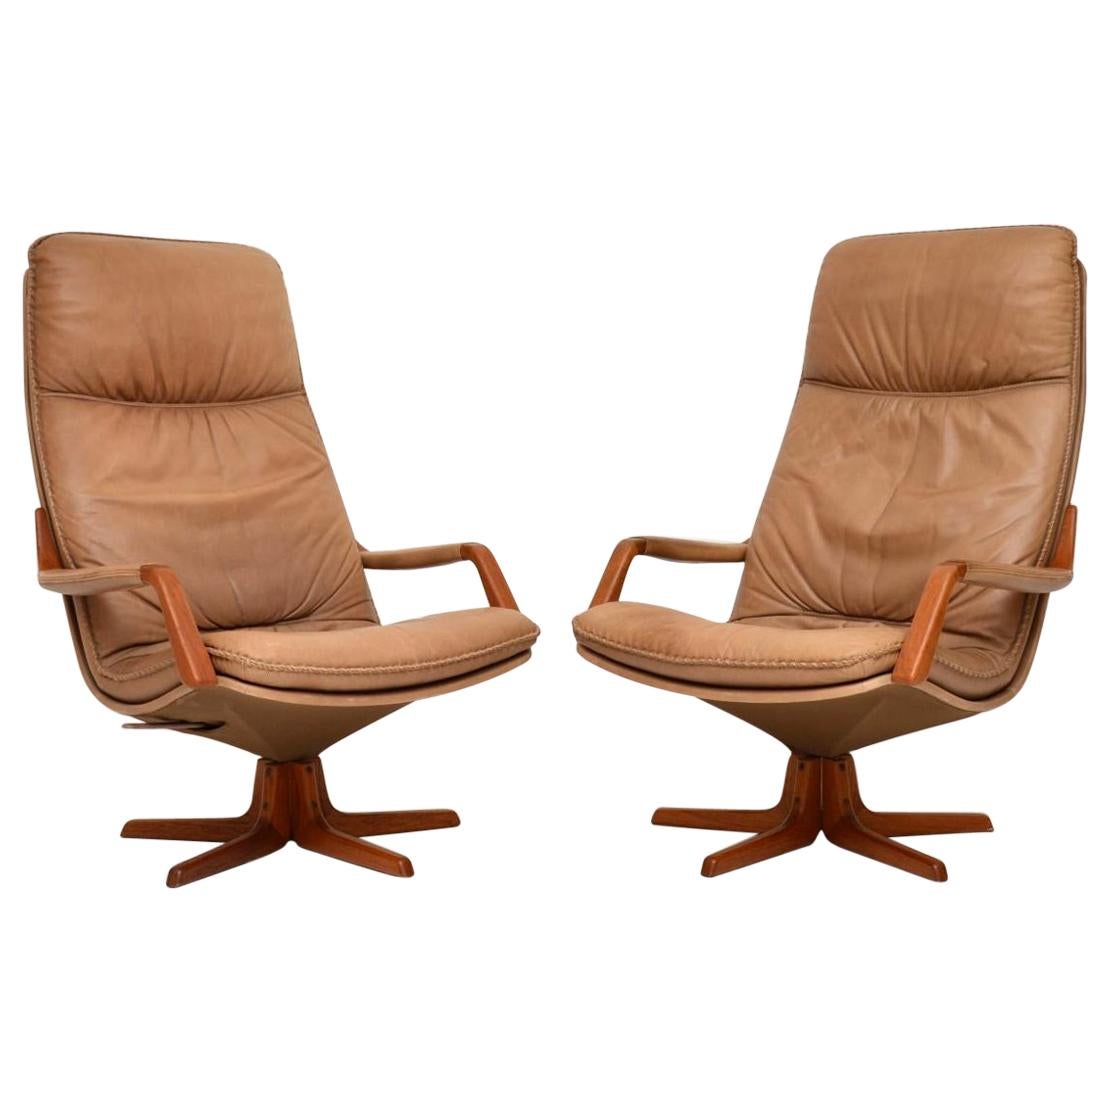 1970s Pair of Danish Leather and Teak Reclining Armchairs